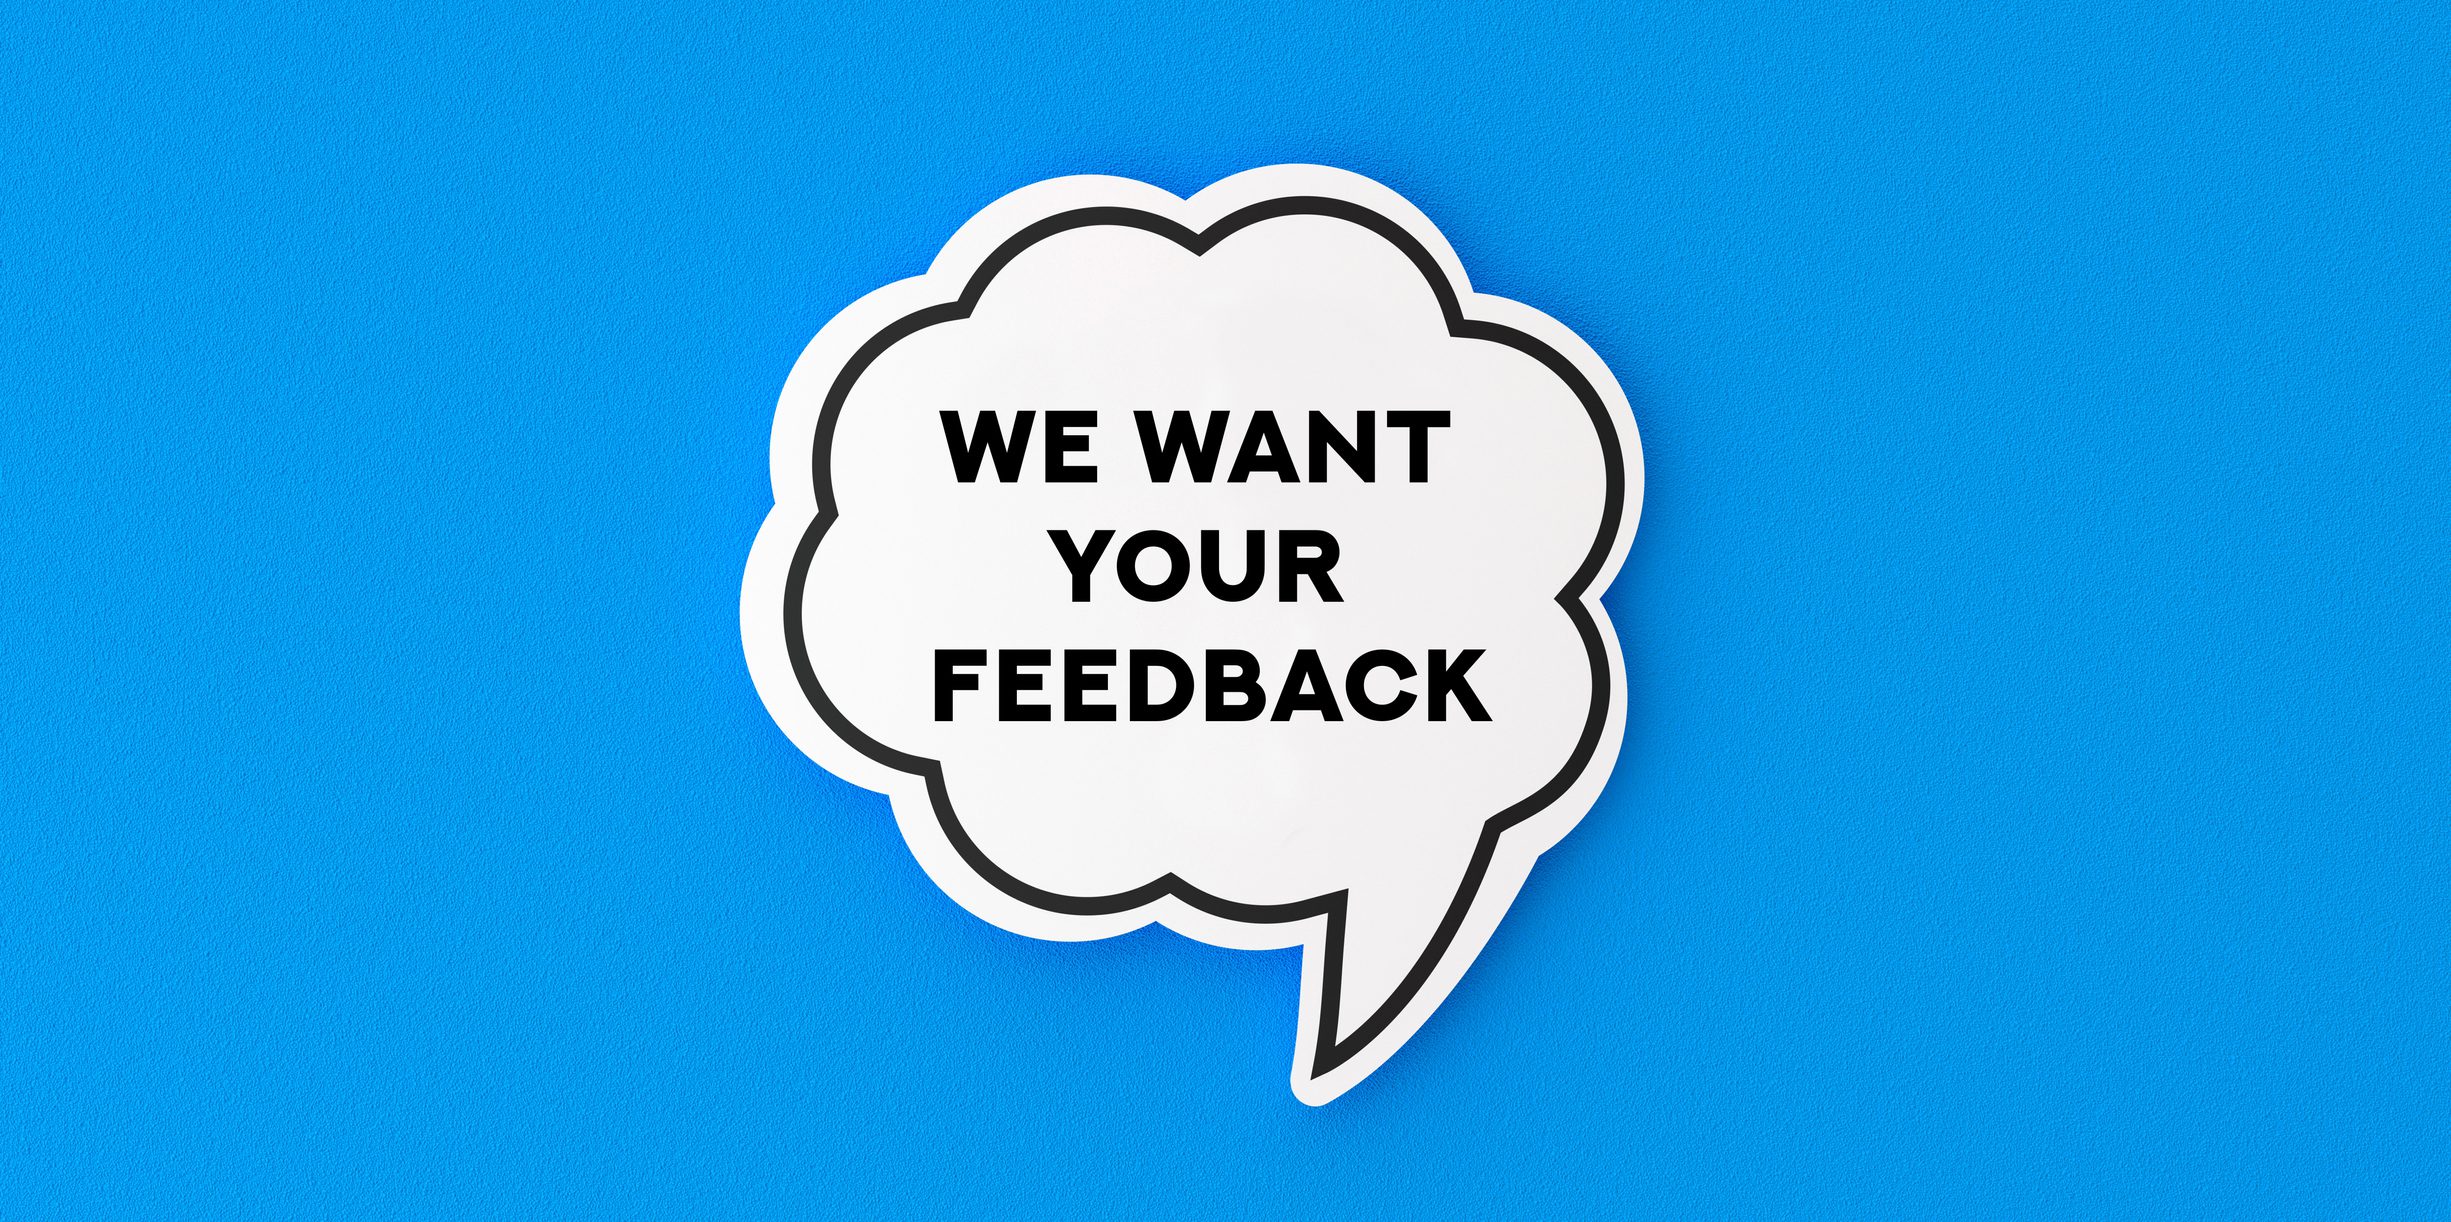 Speech Bubble and Blue Background That Says, We Want Your Feedback